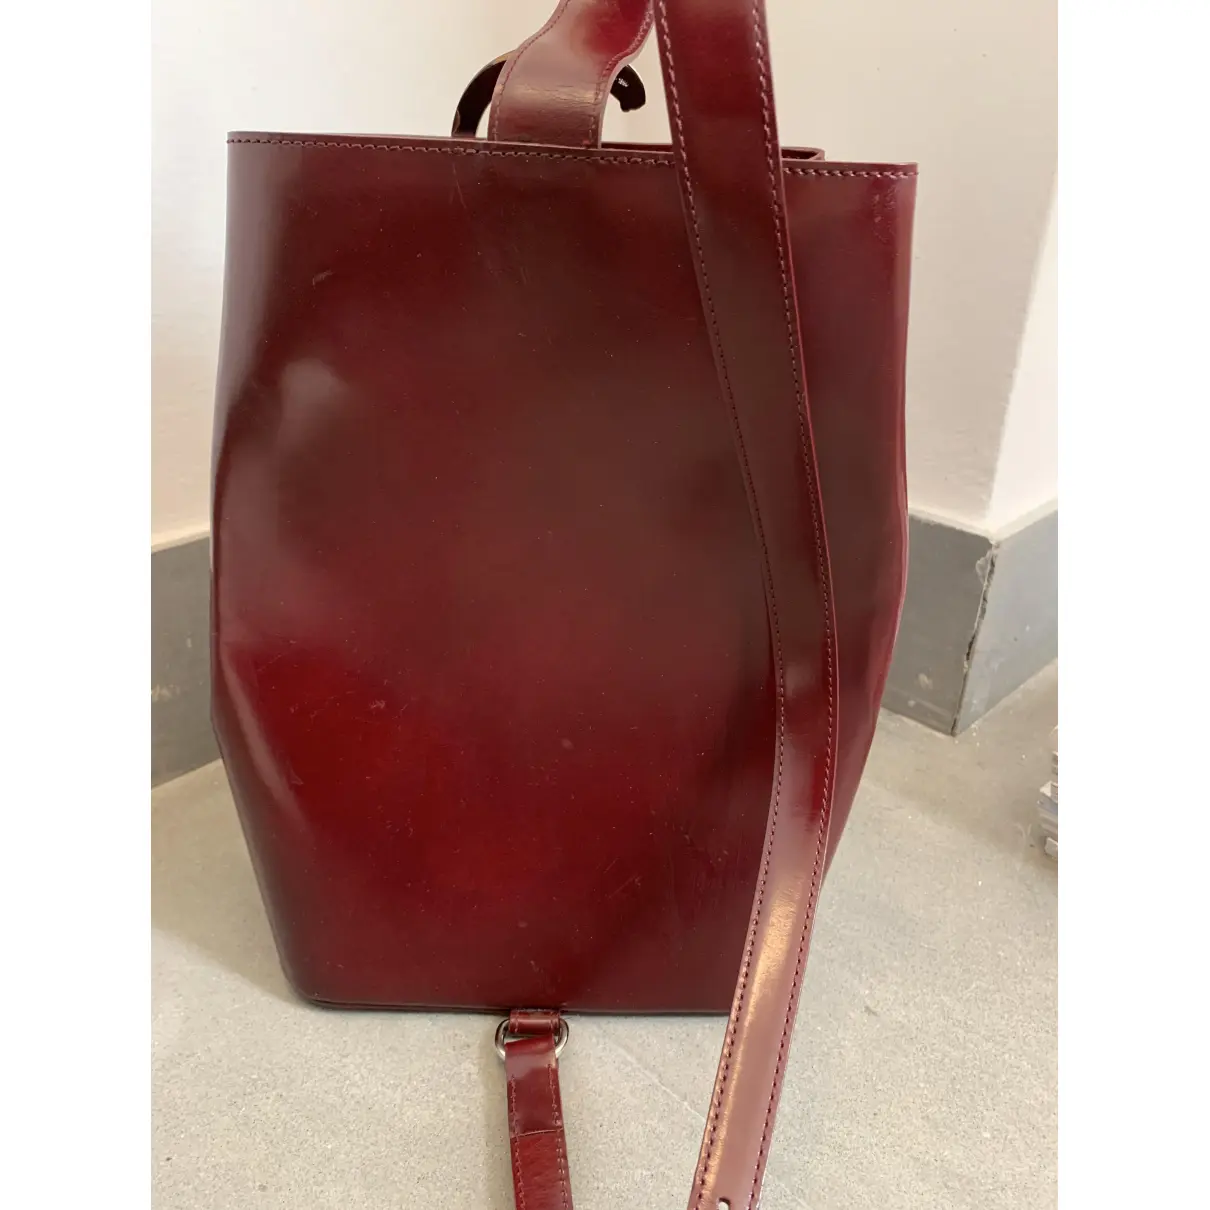 Buy Cartier Panthère leather backpack online